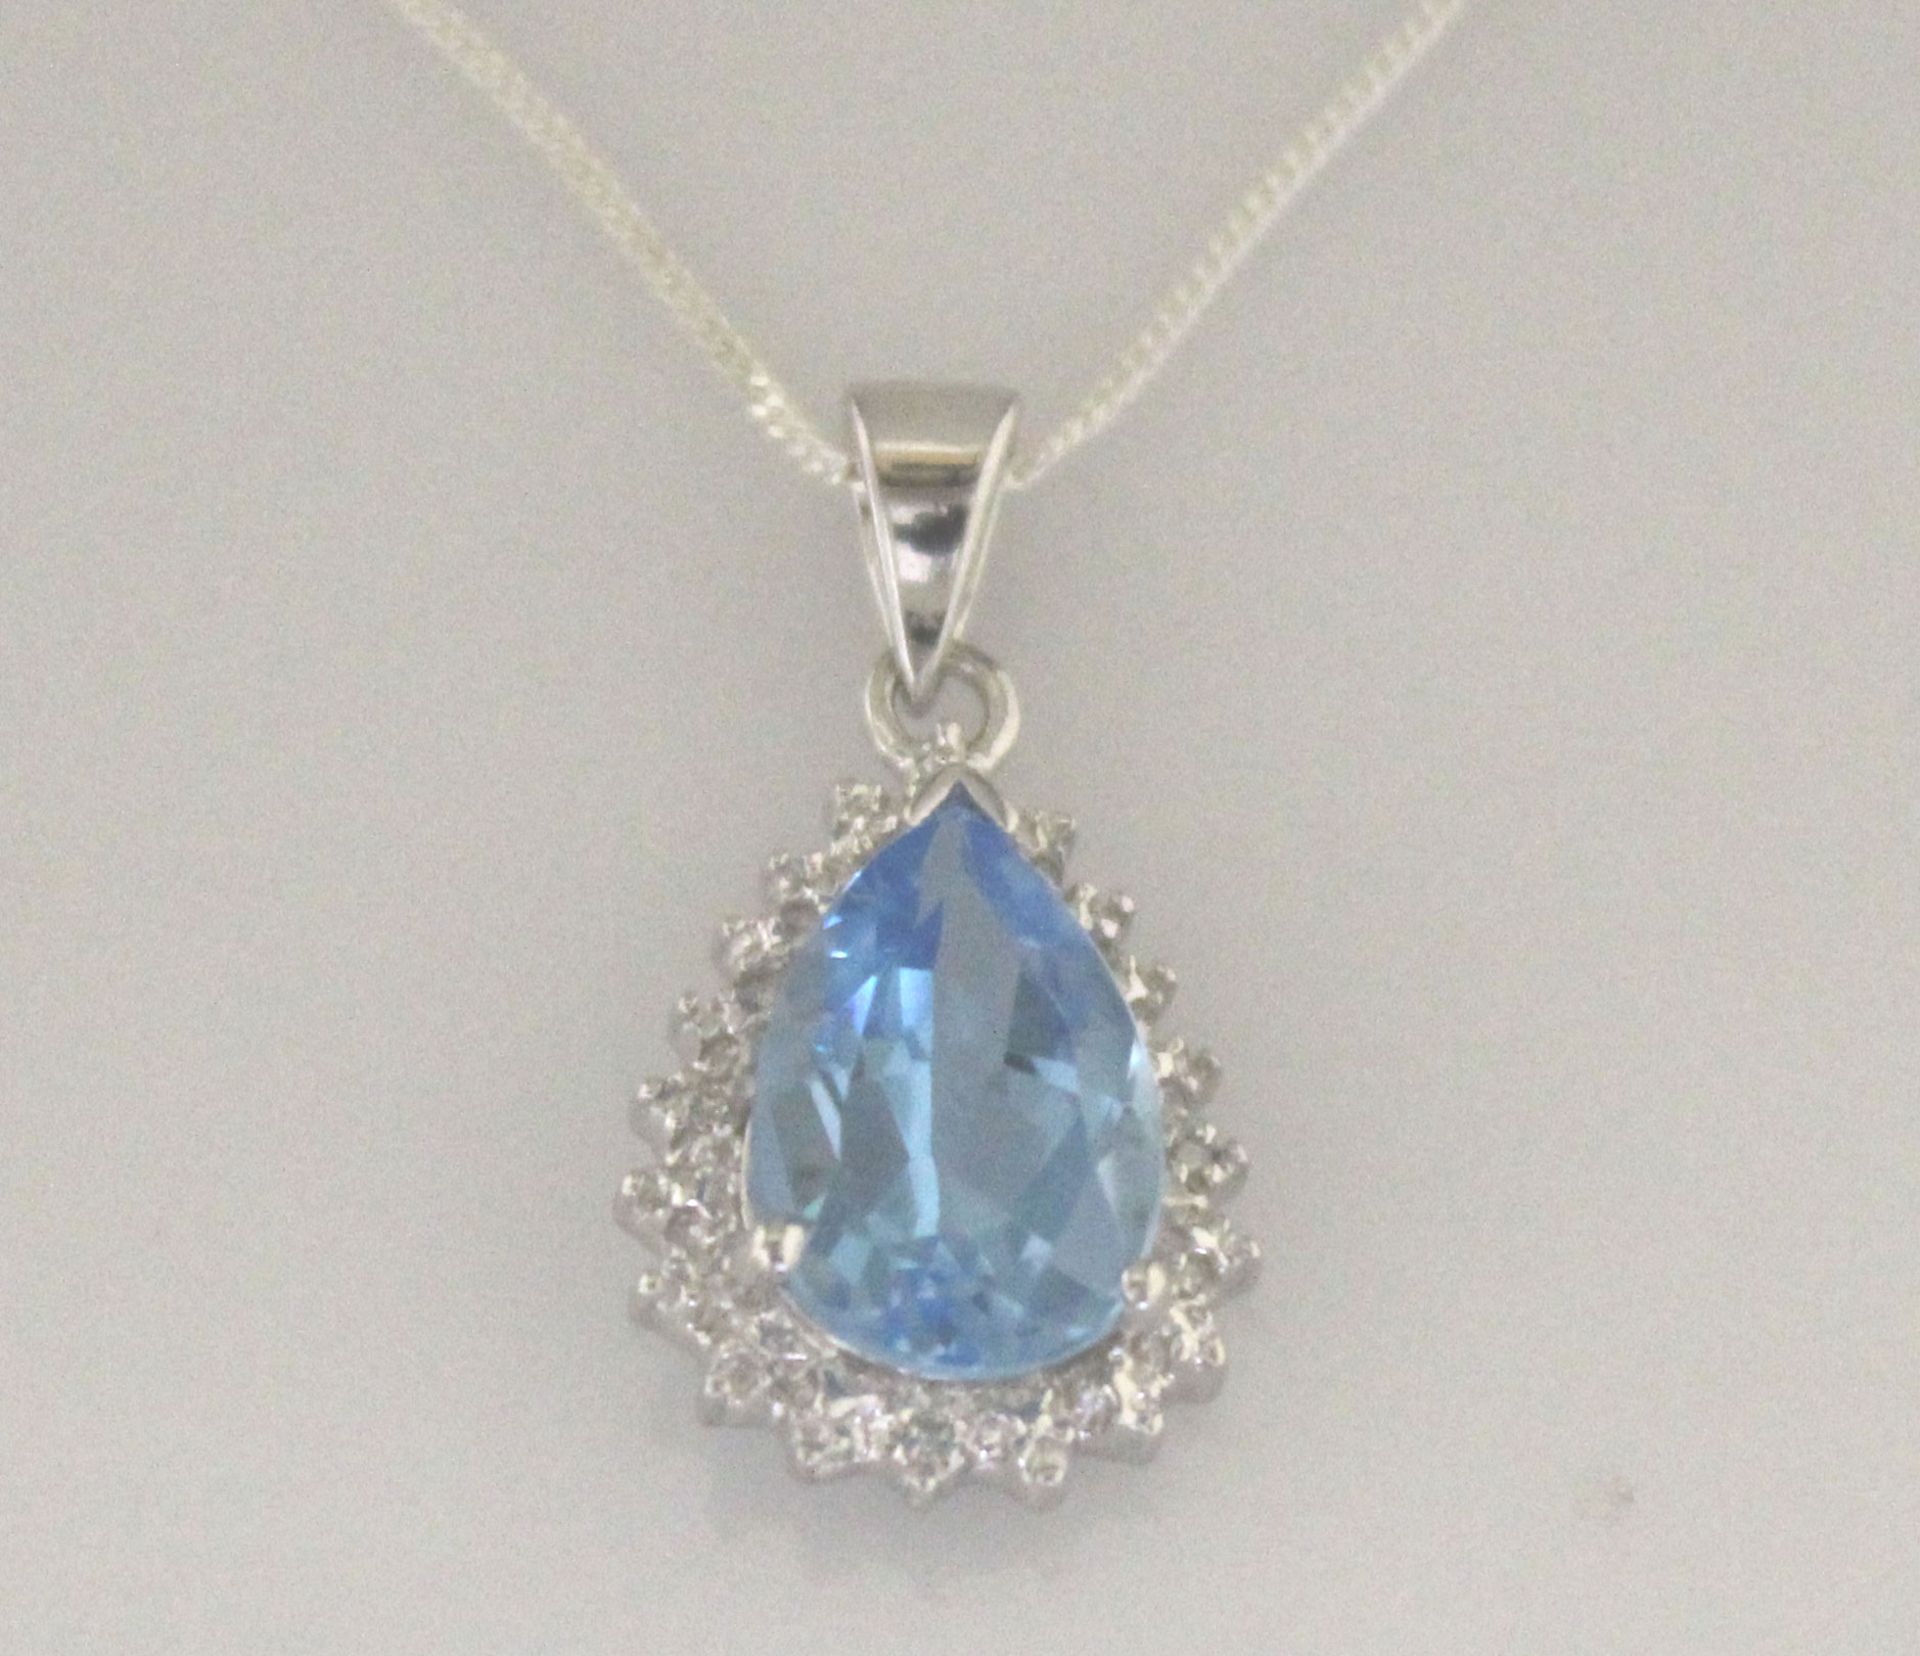 9ct White Gold Diamond And Blue Topaz Pendant 0.01 Carats - Valued by GIE £1,220.00 - 9ct White Gold - Image 5 of 6